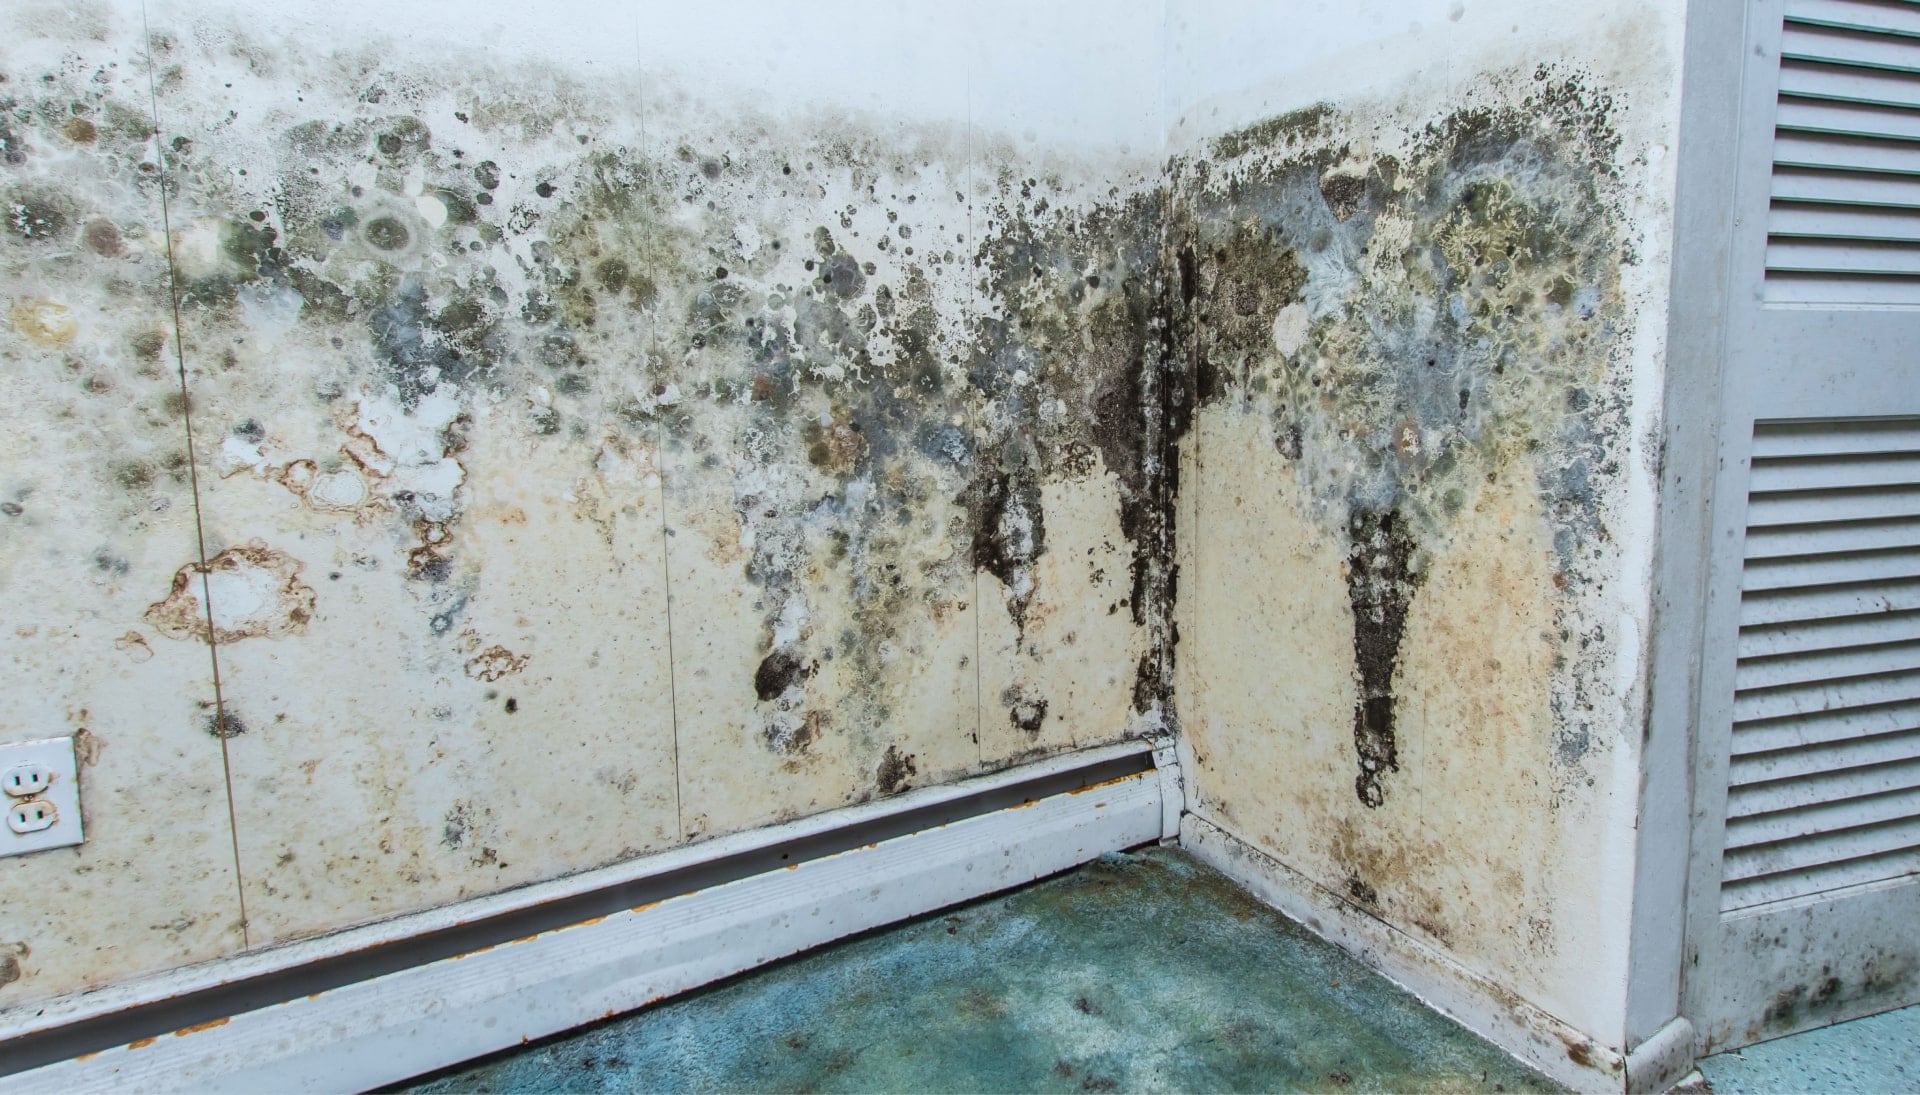 Professional mold removal, odor control, and water damage restoration service in Omaha, Nebraska.